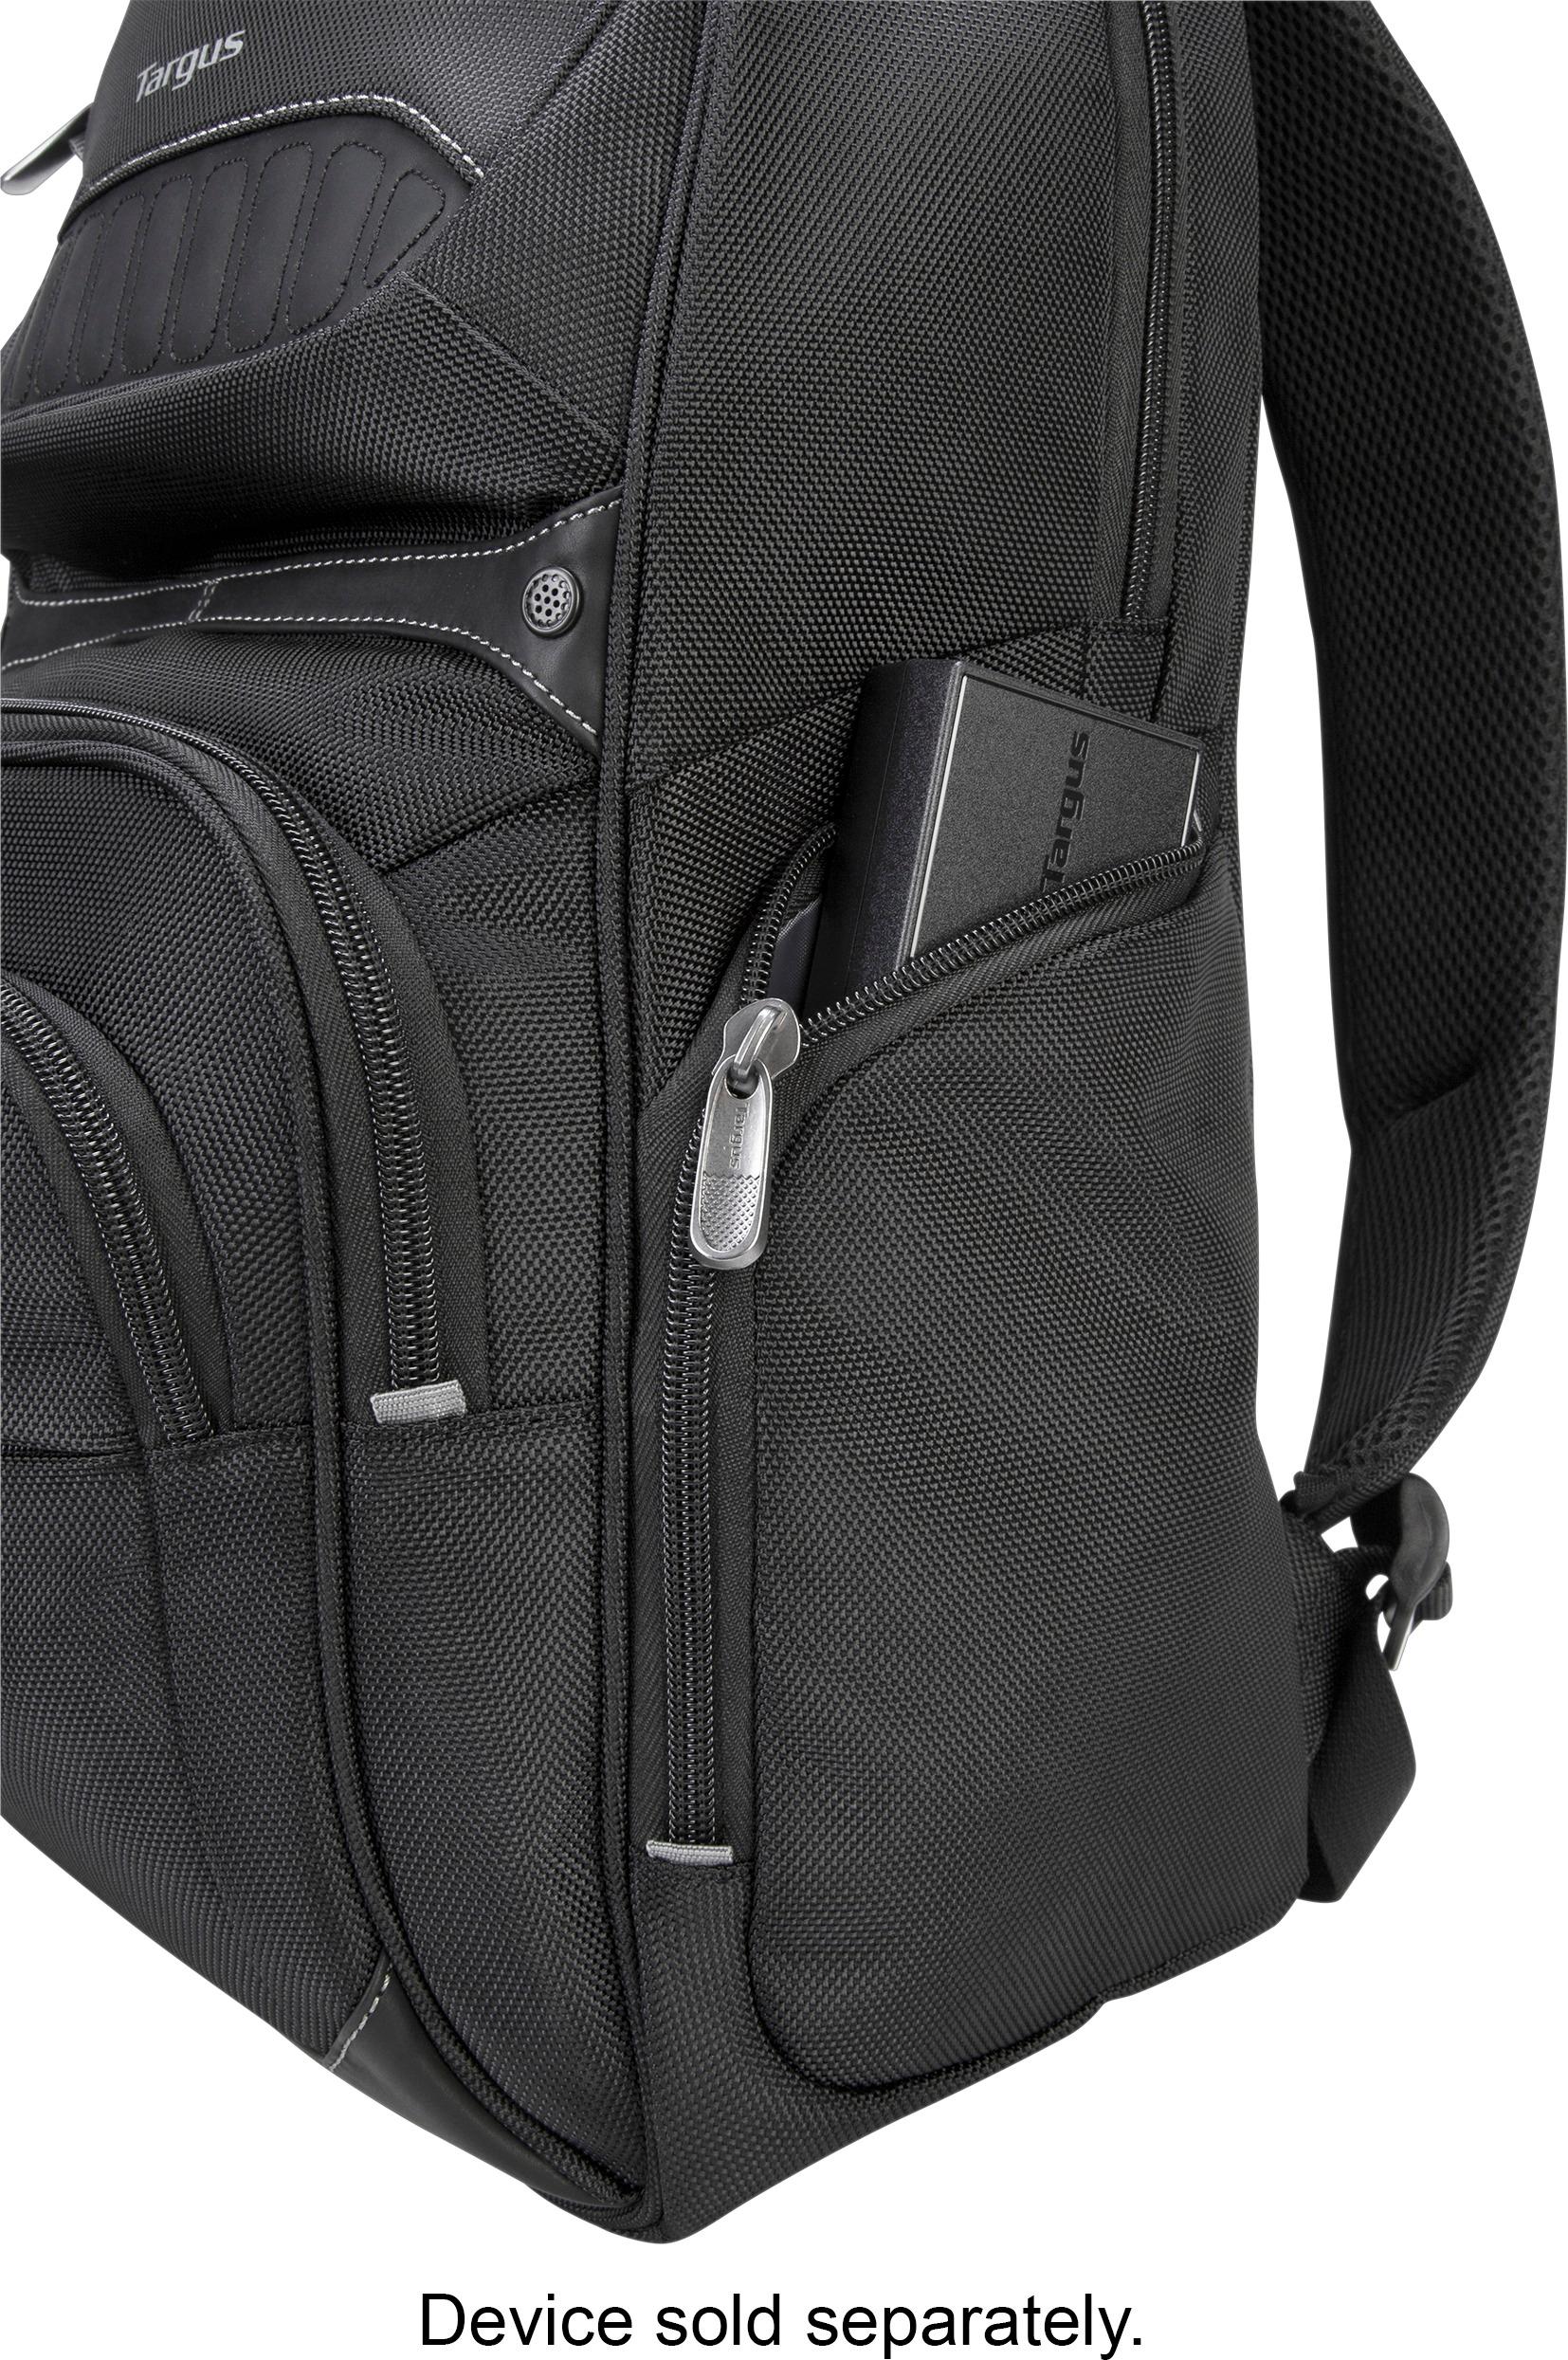 Questions and Answers: Targus Legend Laptop Backpack Black PBS705US ...